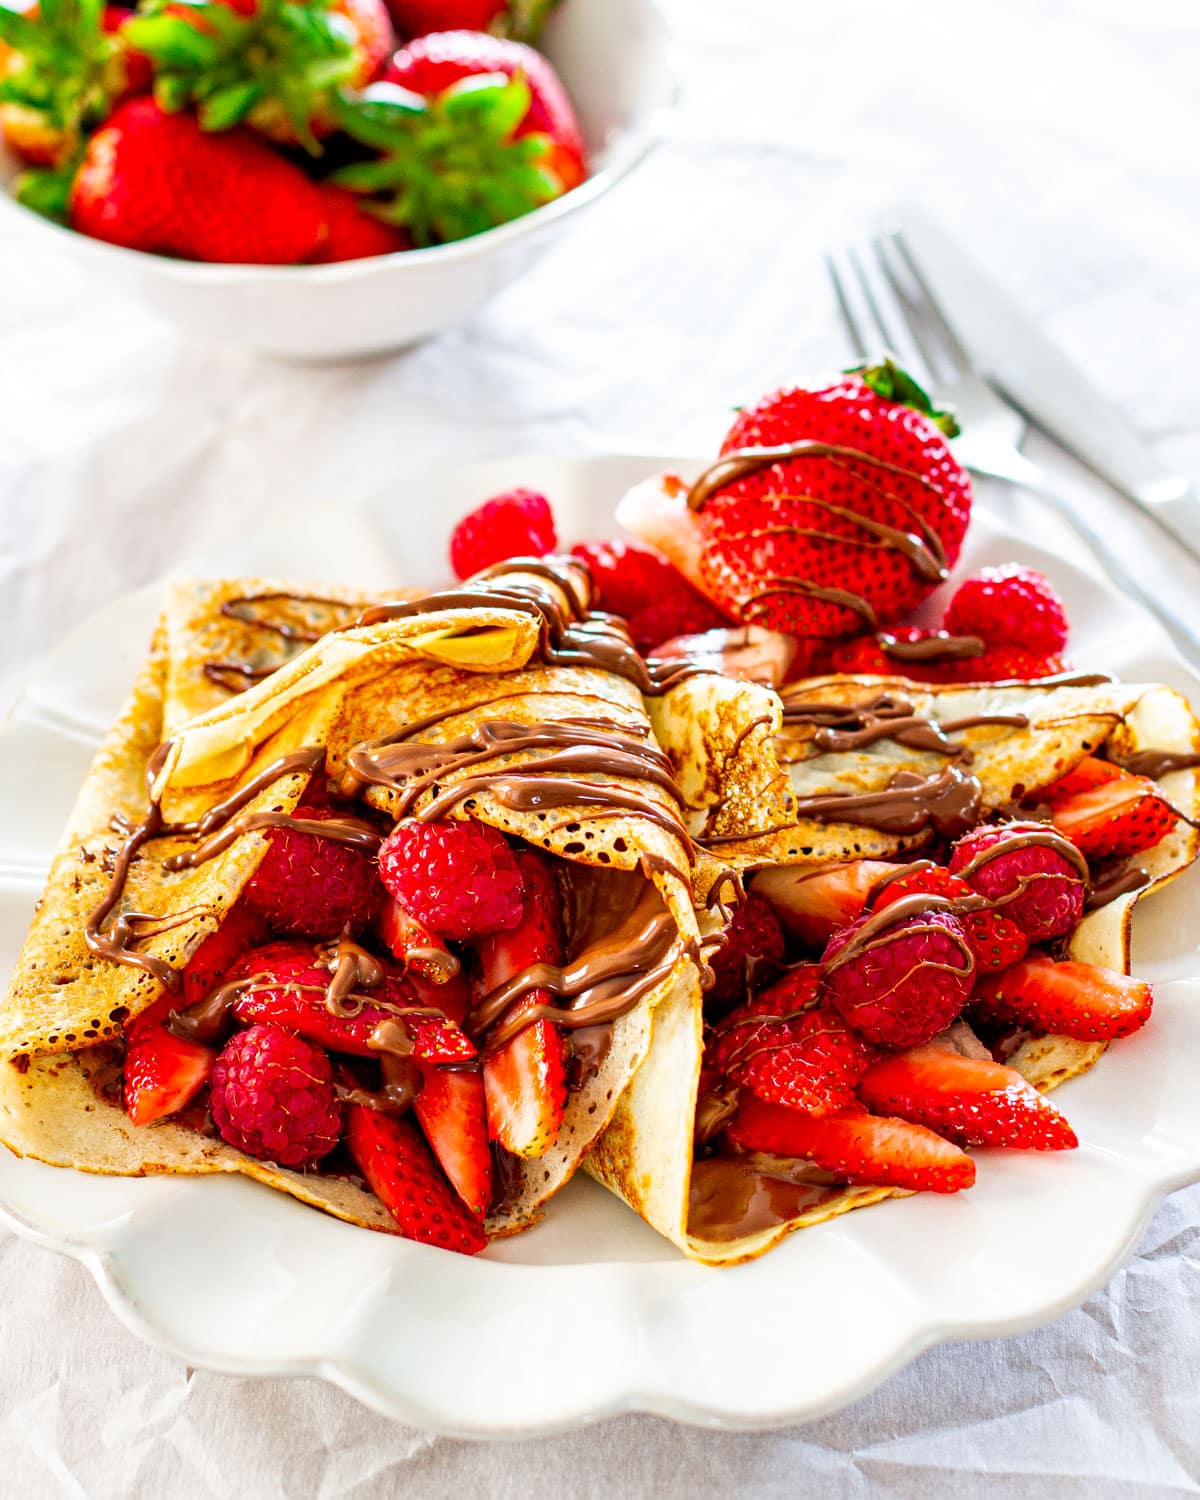 two homemade crepes stuffed with nutella and berries on a white plate